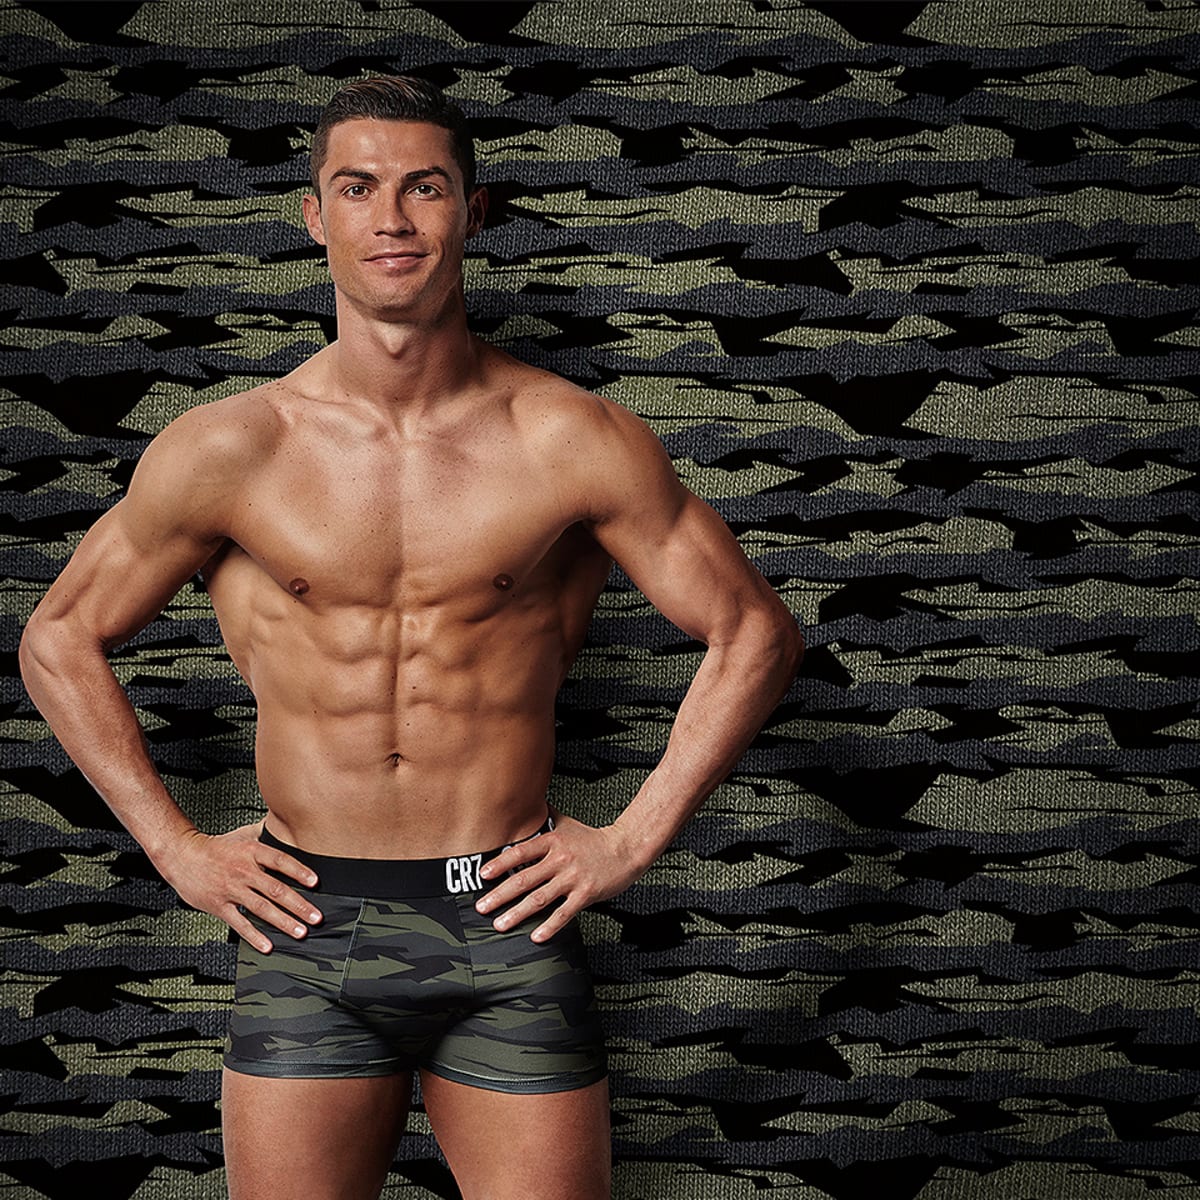 PHOTOS : Cristiano Ronaldo Shows Off His Toned Body In New Underwear Advert  –